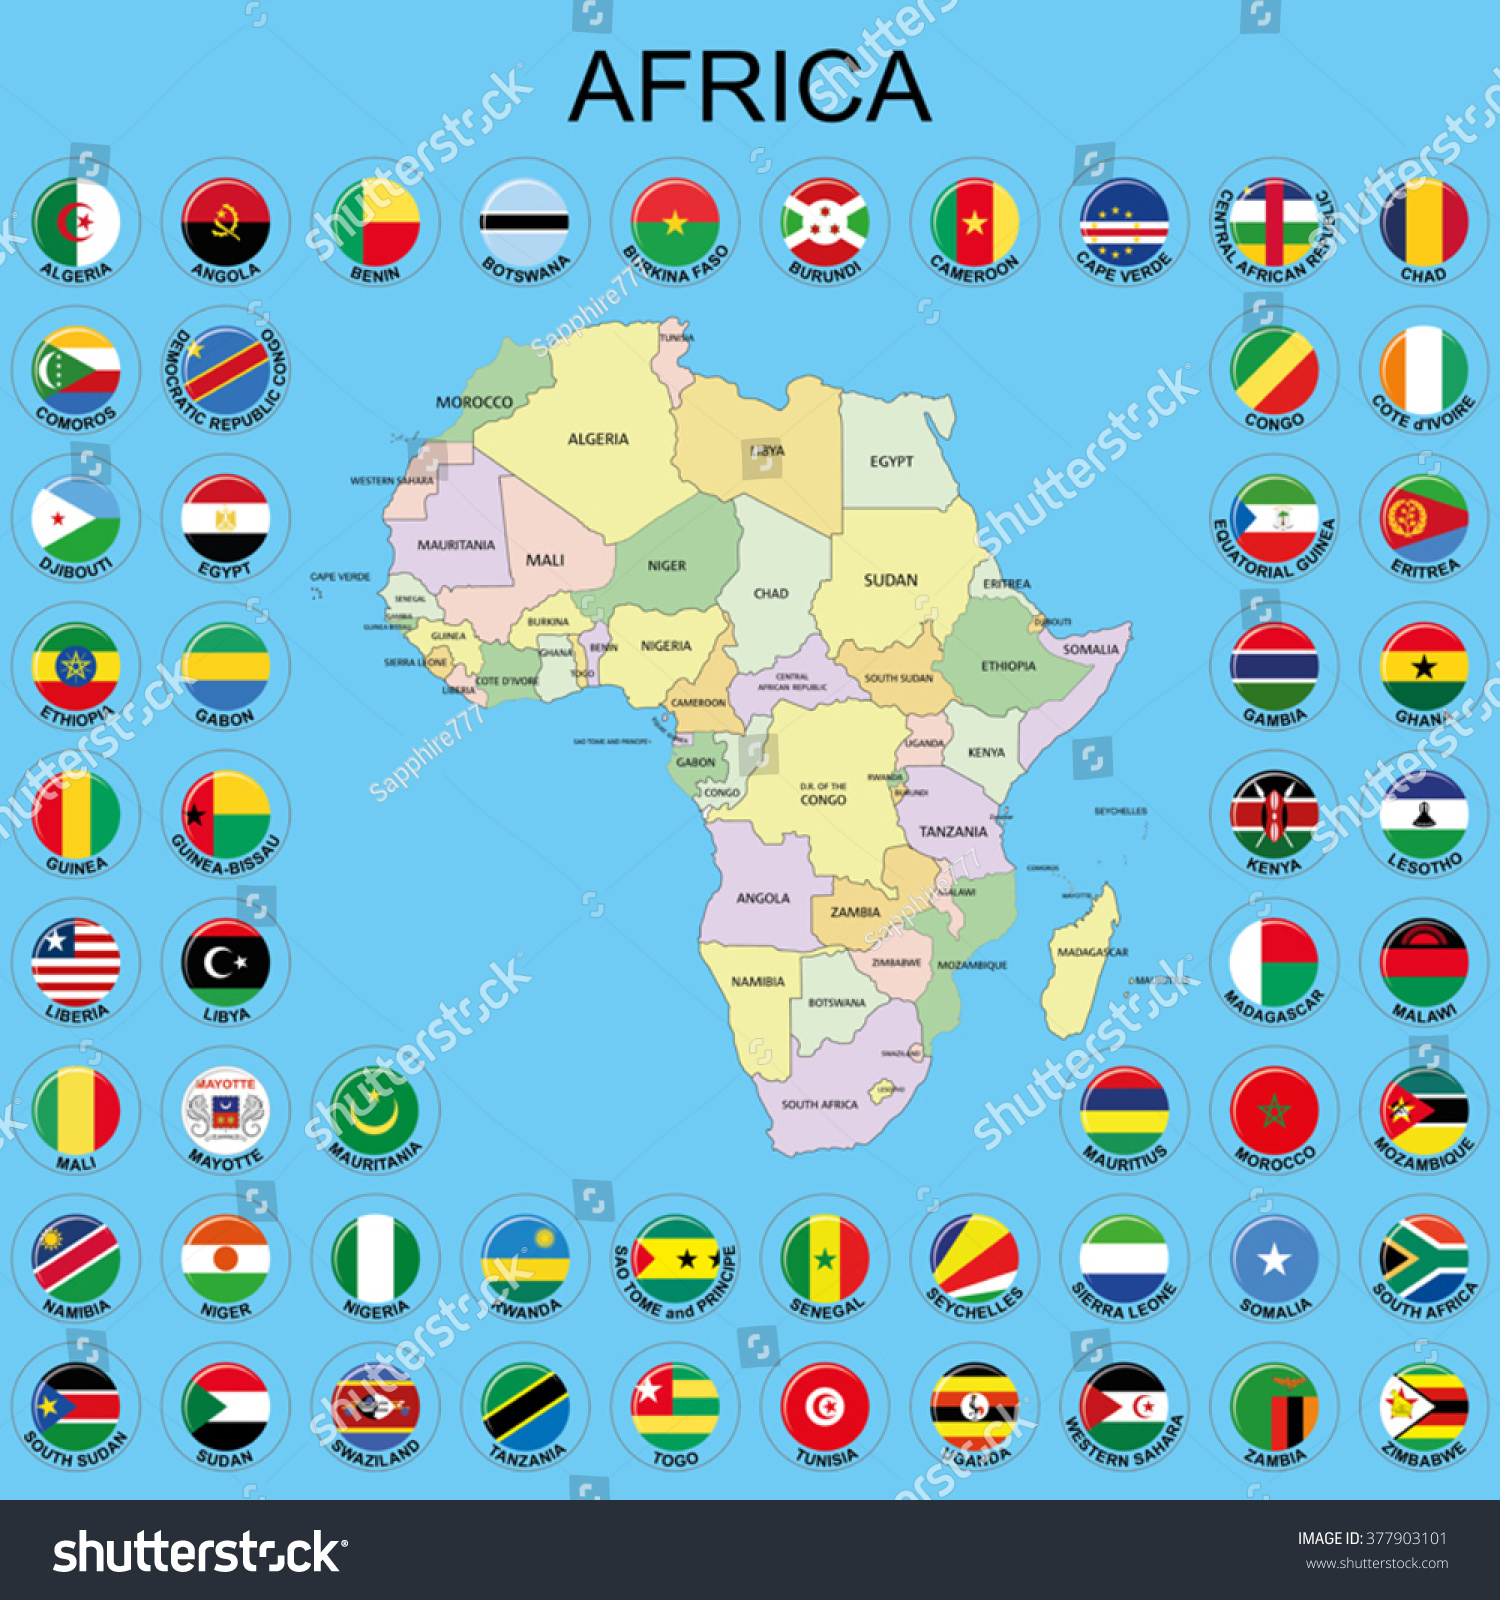 Africa Flags Around The Maps Stock Vector Illustration 377903101 Shutterstock 4453